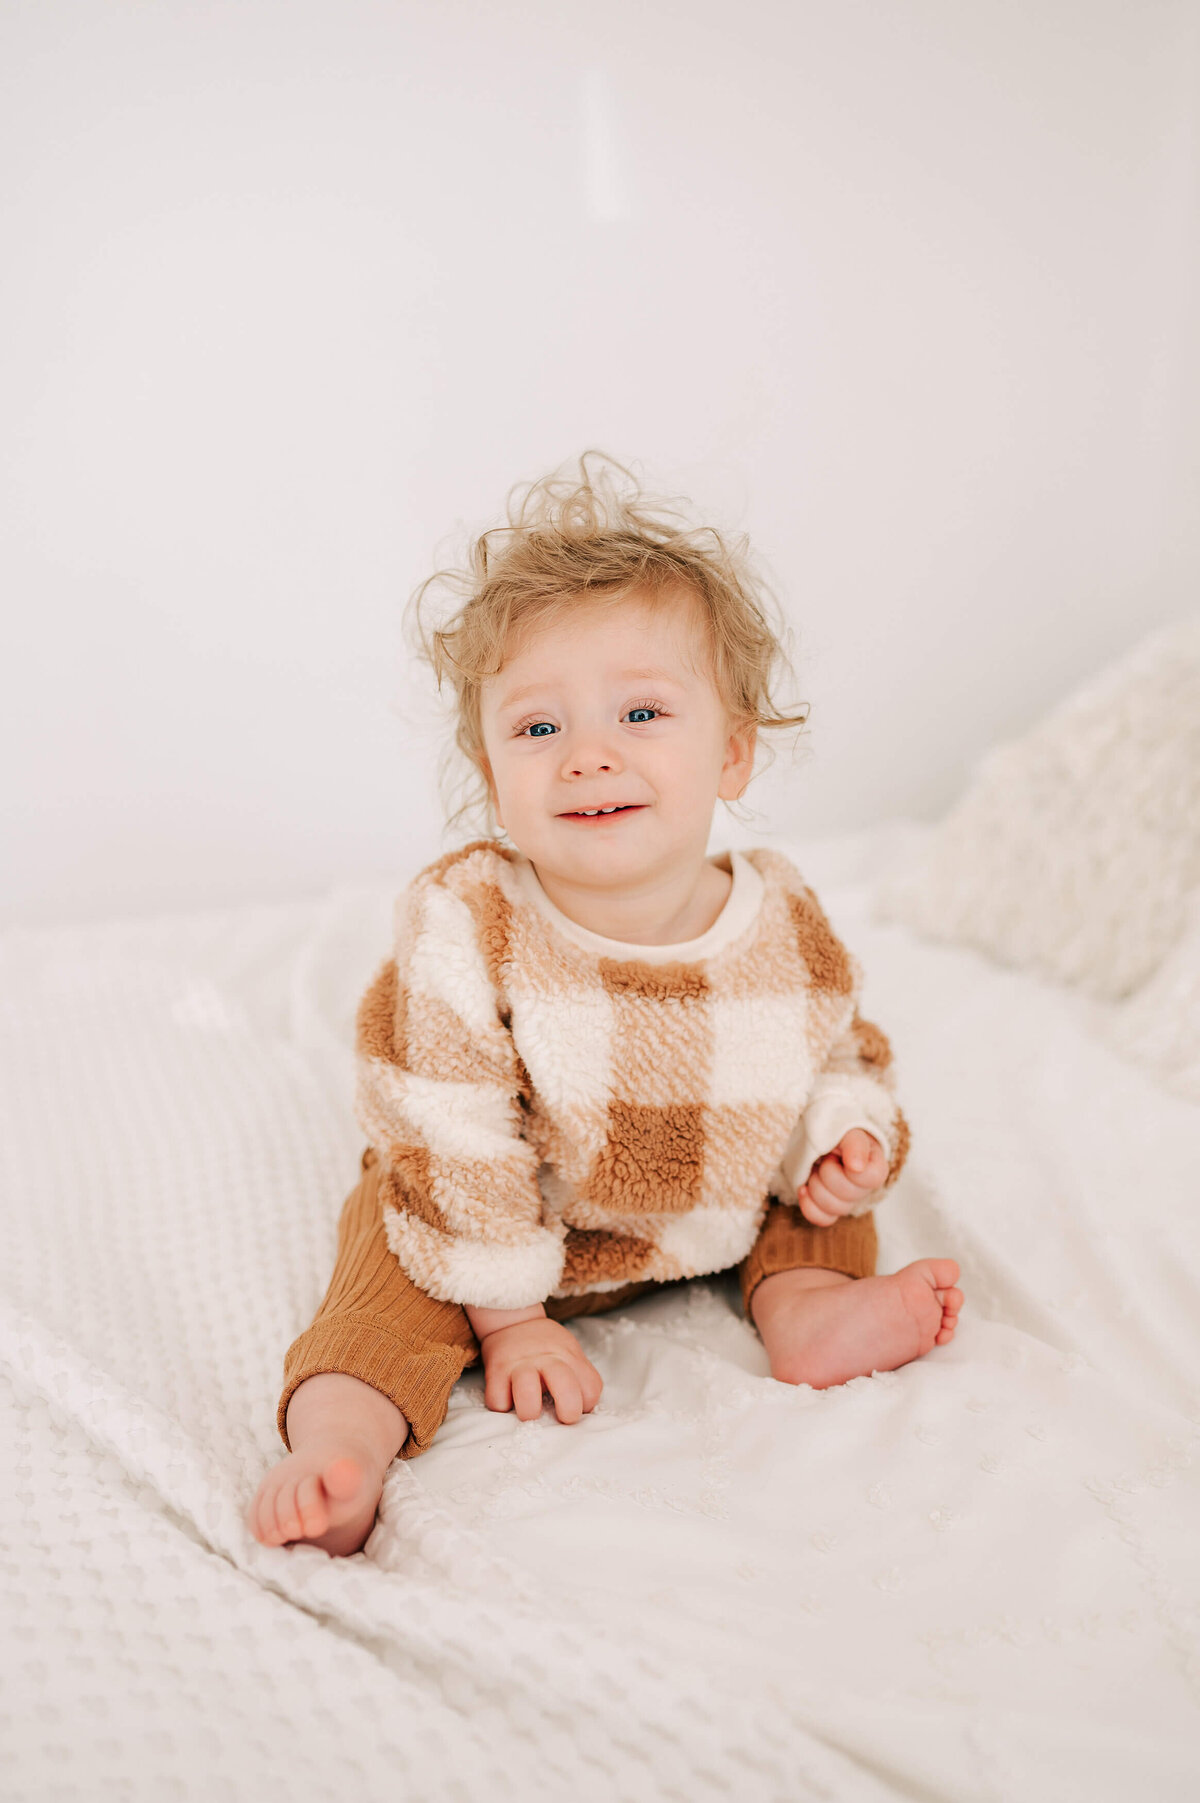 Springfield MO baby photographer Jessica Kennedy of The XO Photography captures little boy smiling on bed